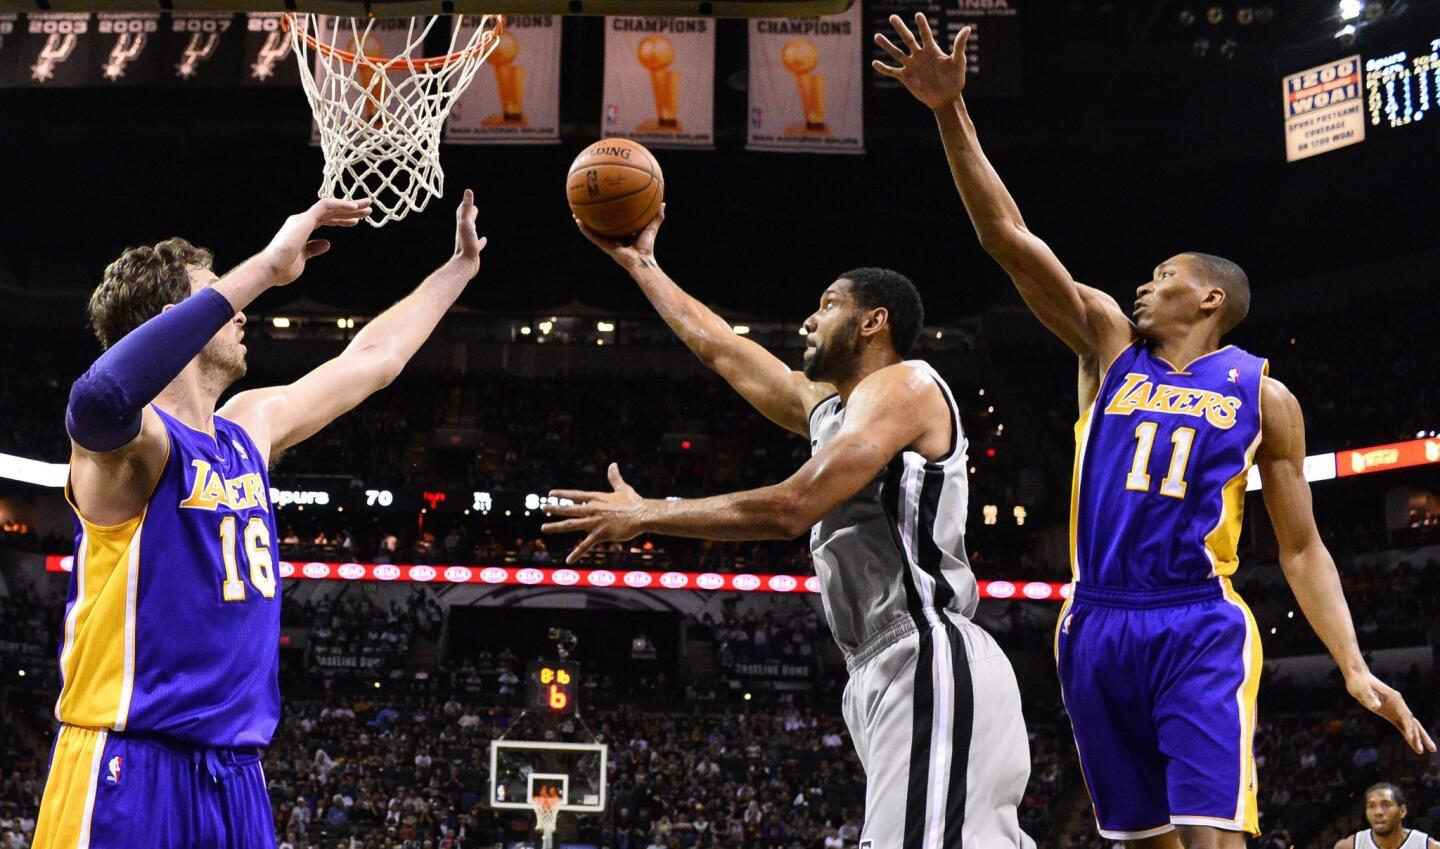 Spurs power forward Tim Duncan attempts a short-range shot between Lakers power forward Pau Gasol (16) and forward Wesley Johnson (11) in the second half Friday night in San Antonio.